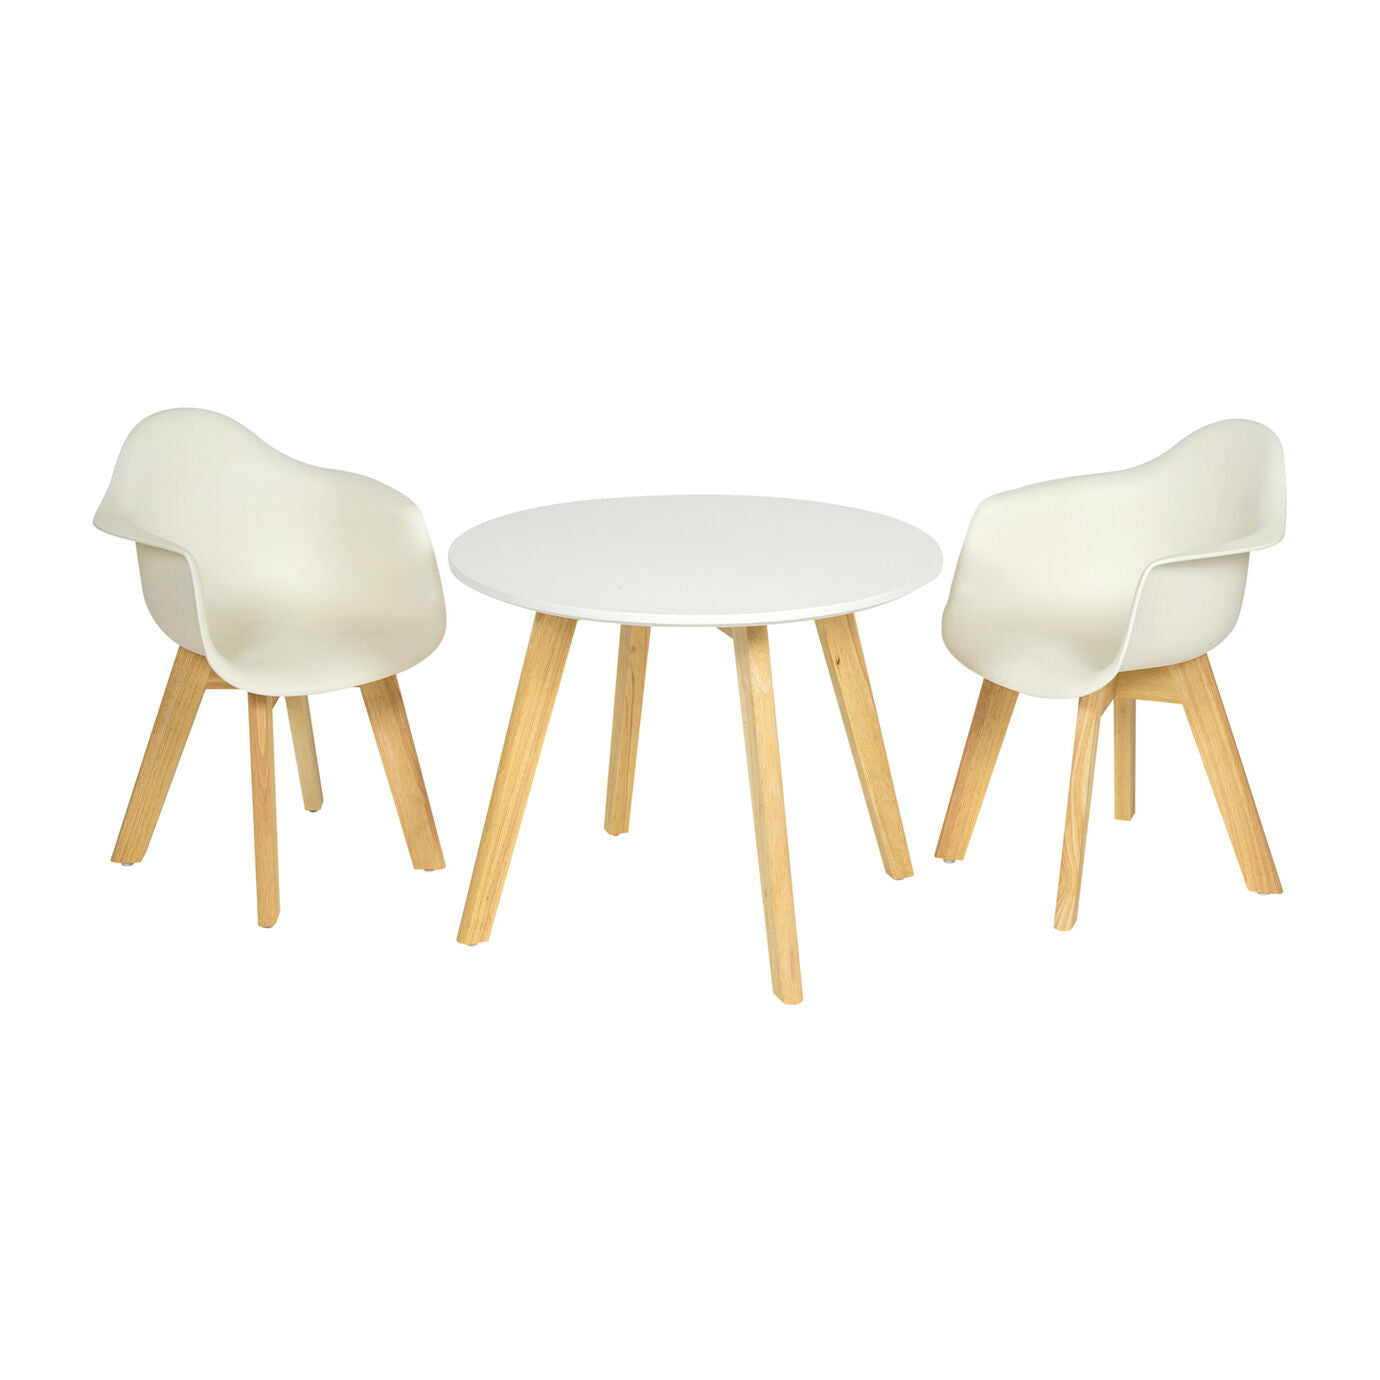 Deer Industries Kids Furniture Singapore, Quax Singapore, Kids White Play Table with Chair